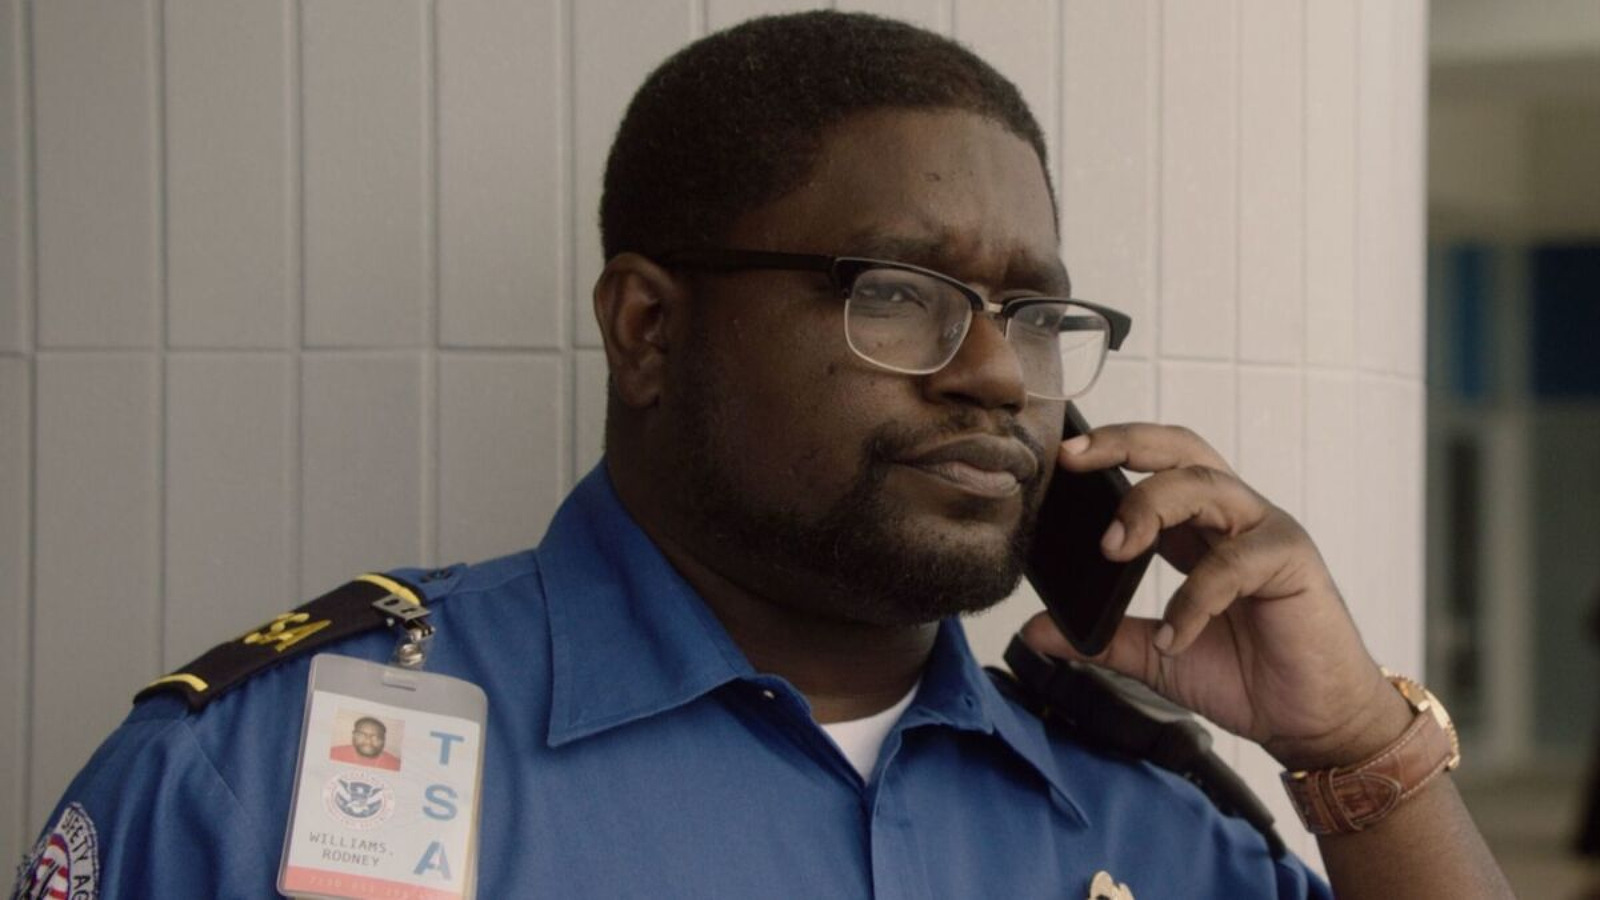 Everything We Know About Code 3, Lil Rel Howery & Rainn Wilson's New Movie